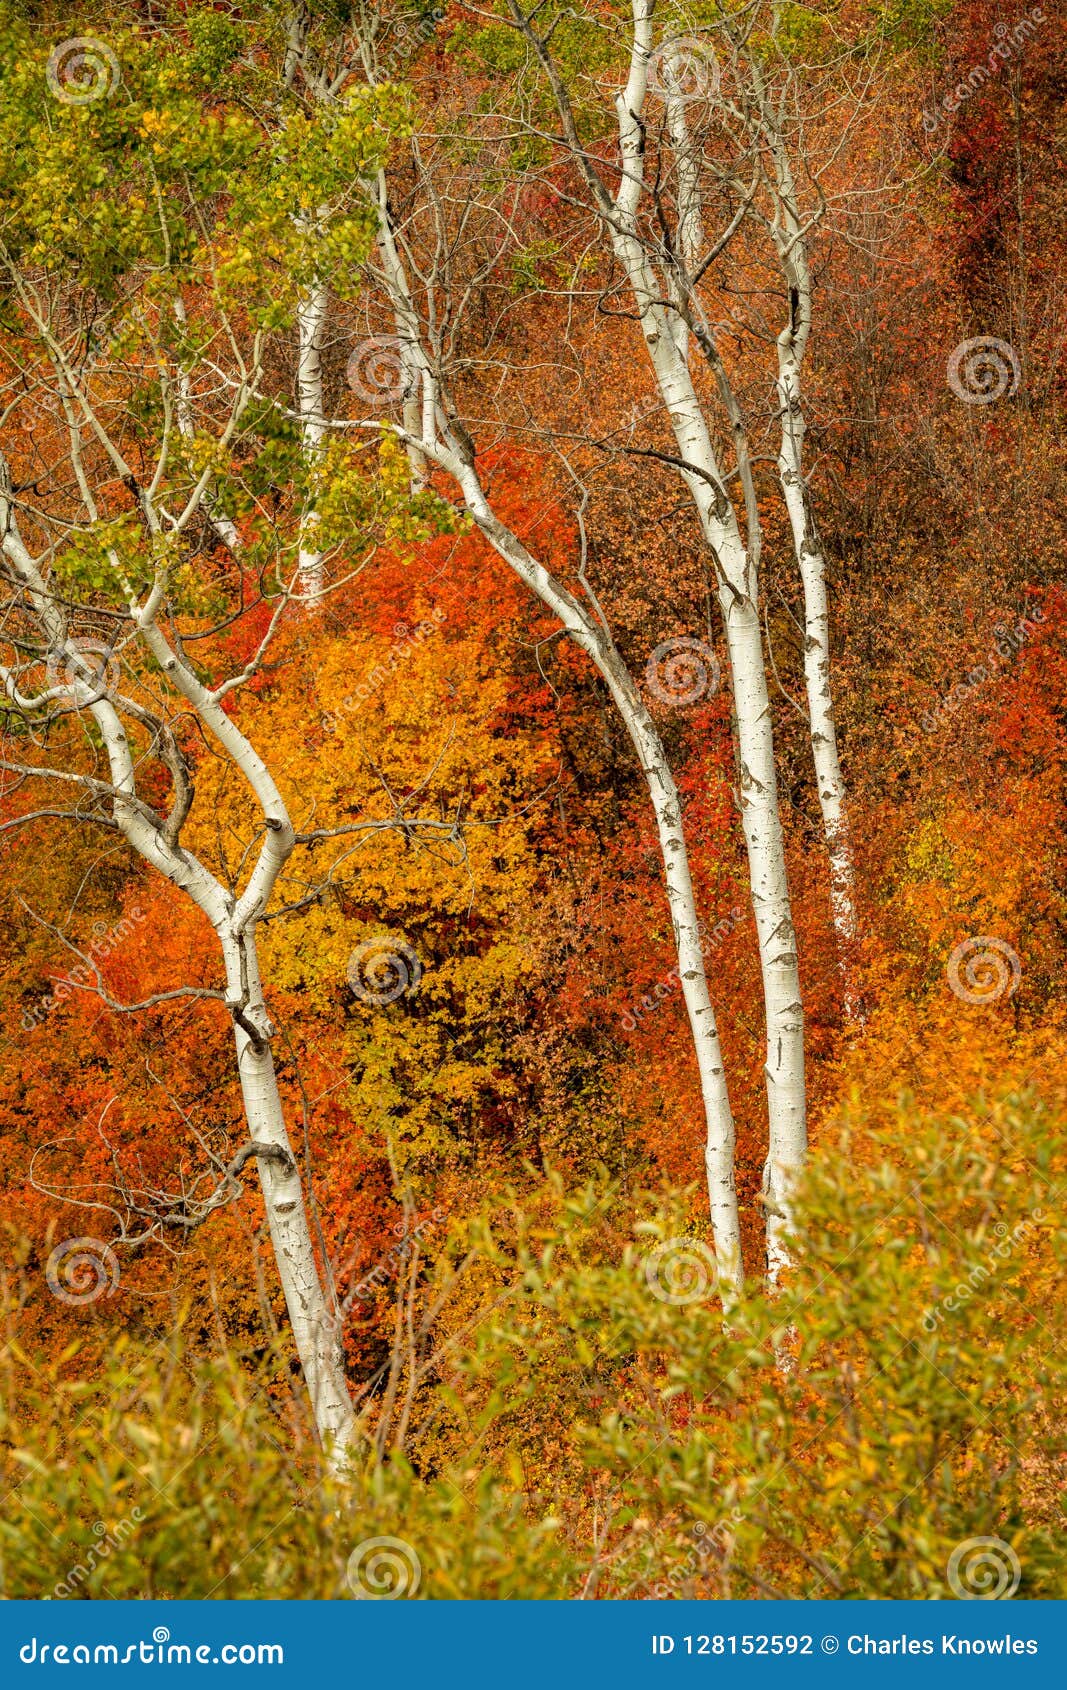 Beautiful White Barked Aspen Trees Surrounded by Fall Colors Stock